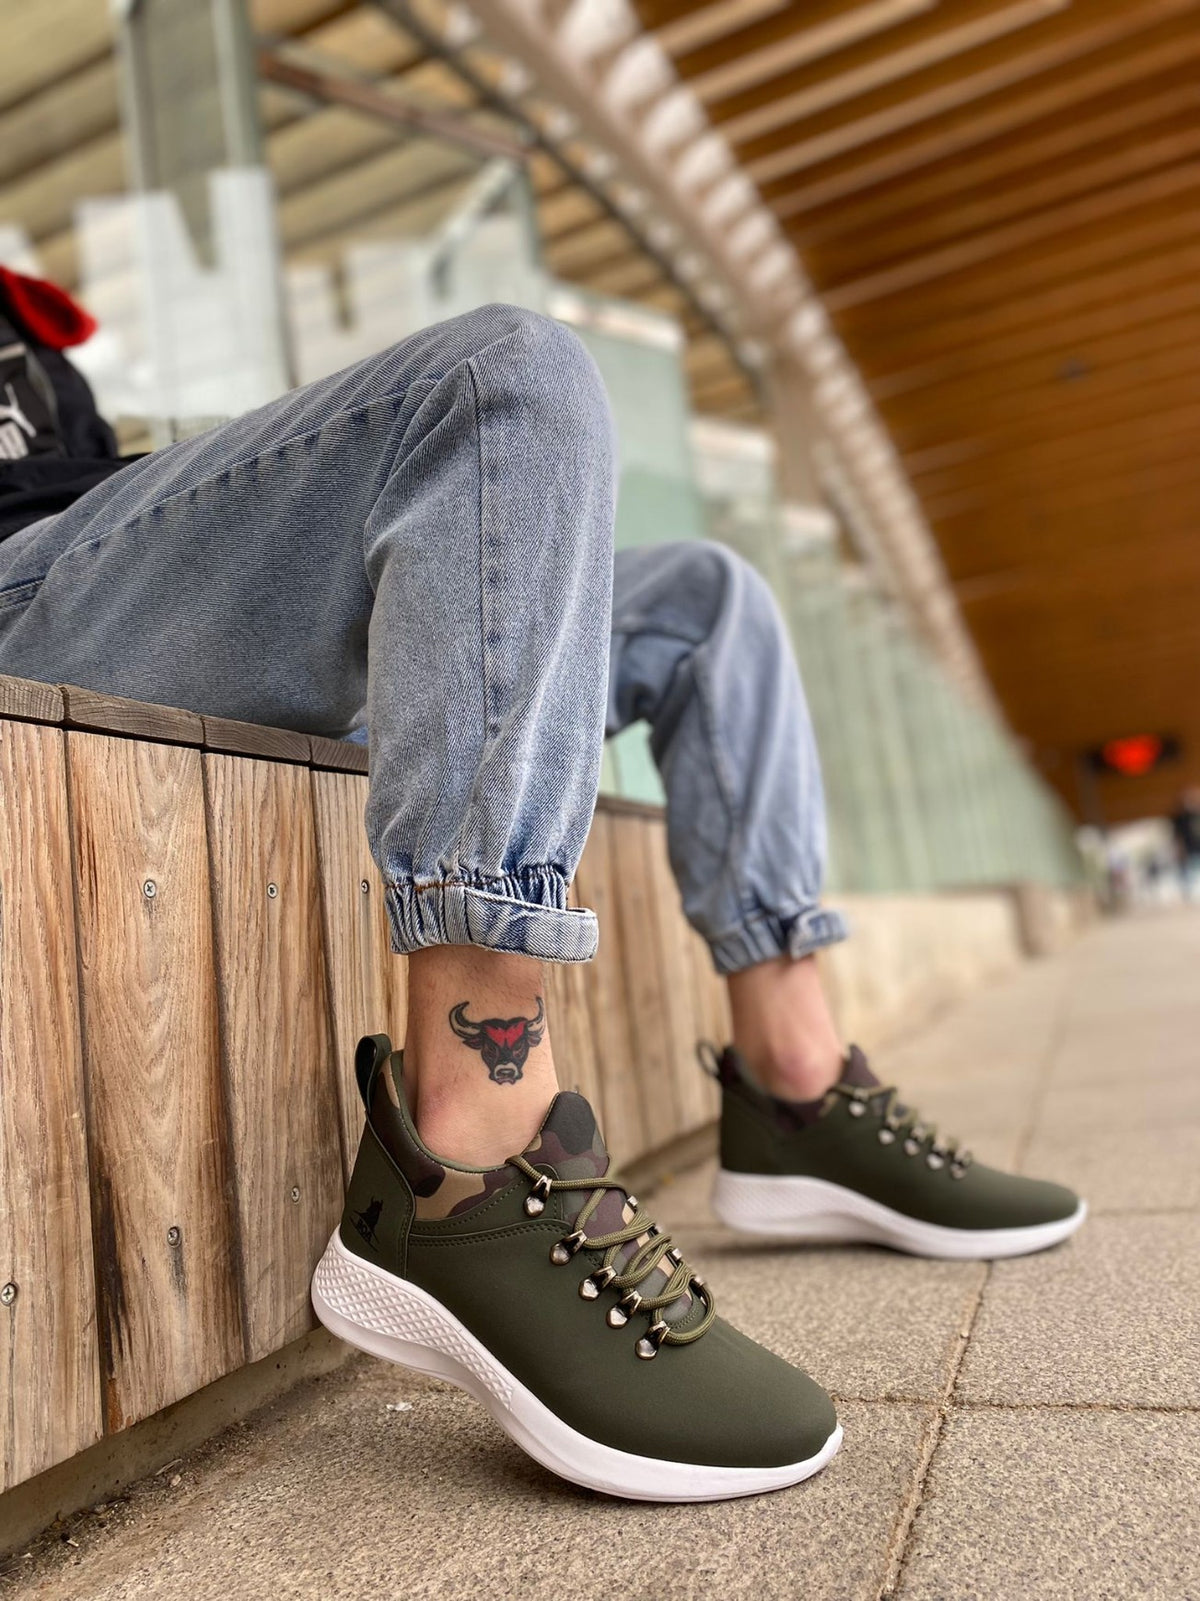 BA0601 Lace-up Comfortable High Sole Khaki camouflage Casual Men's Sneakers - STREETMODE ™